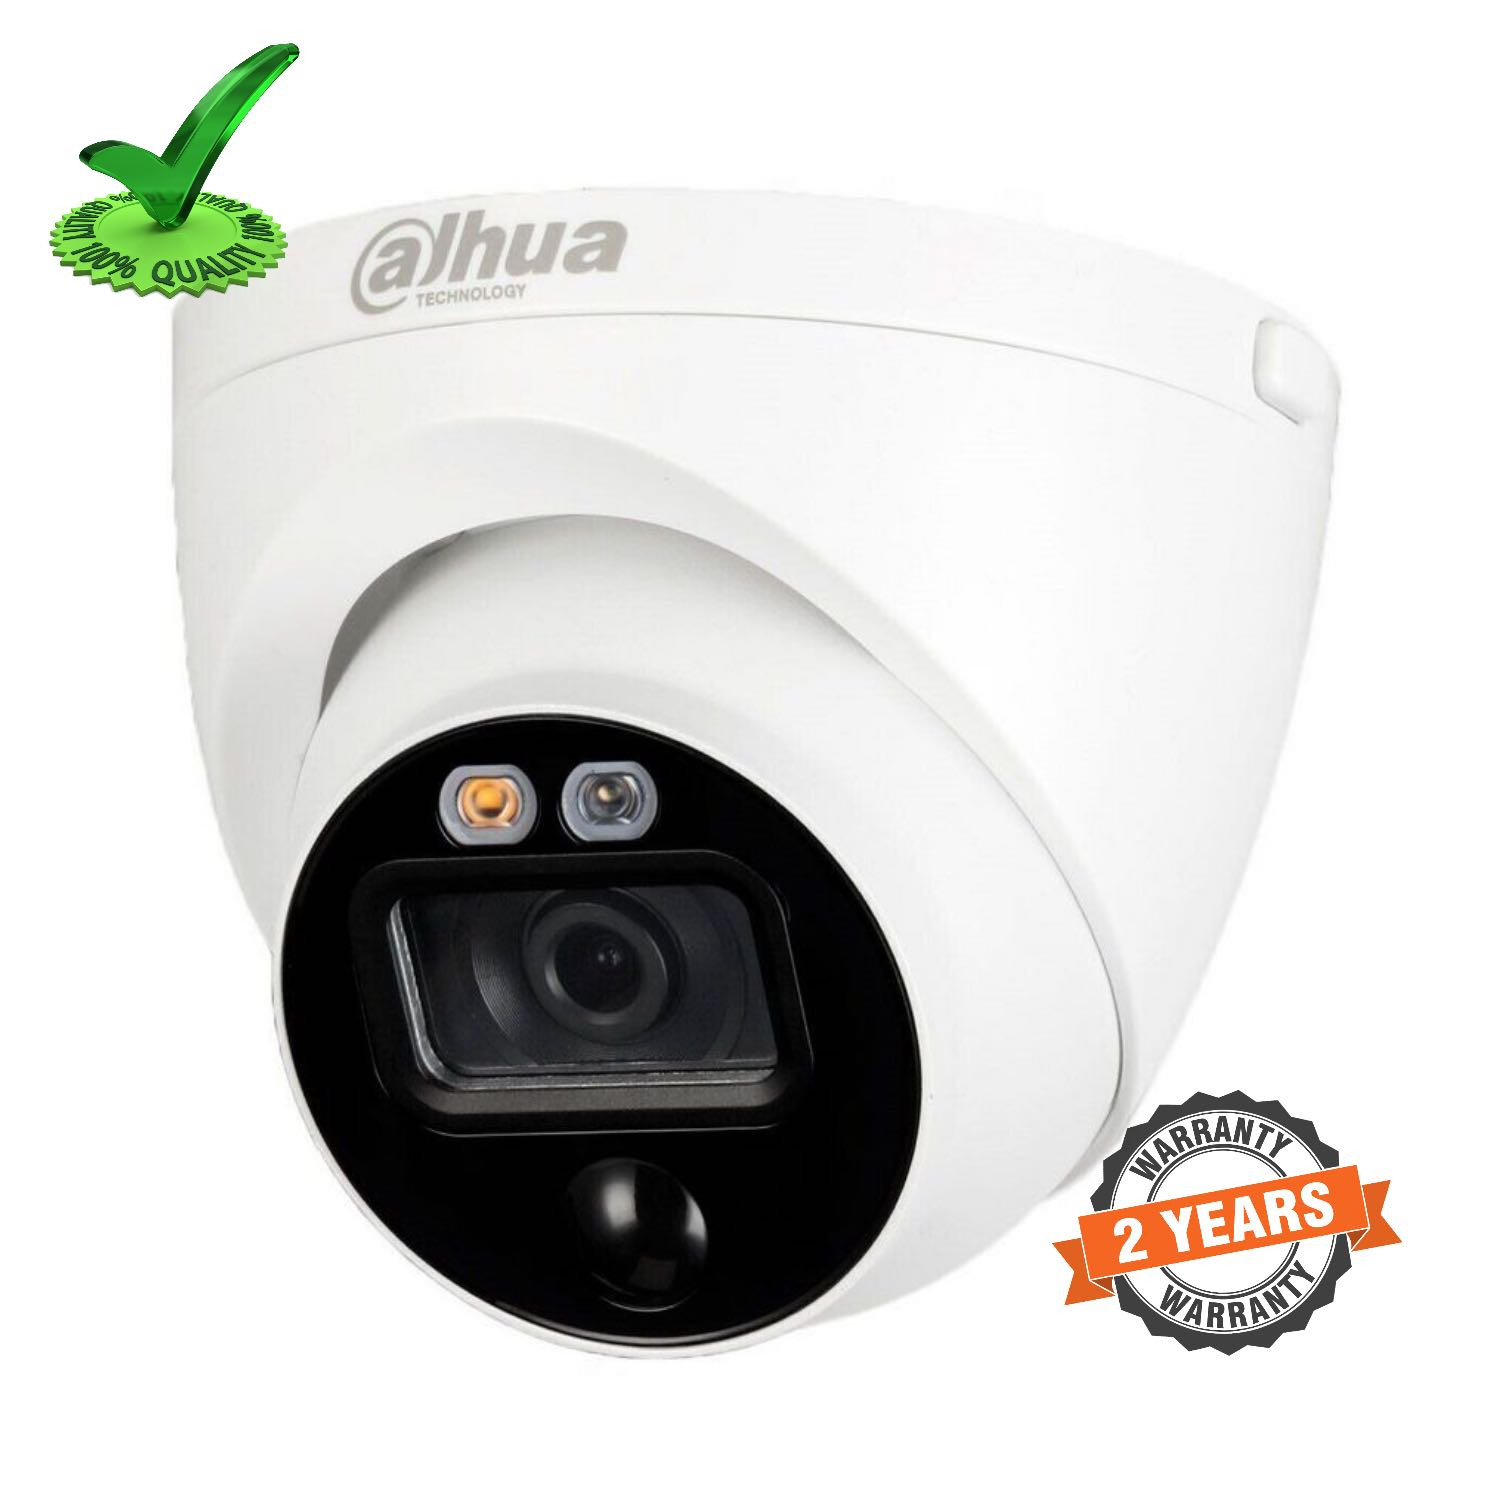 Dahua DH-HAC-ME1200EP-LED 2MP HD Active Deterrence Camera